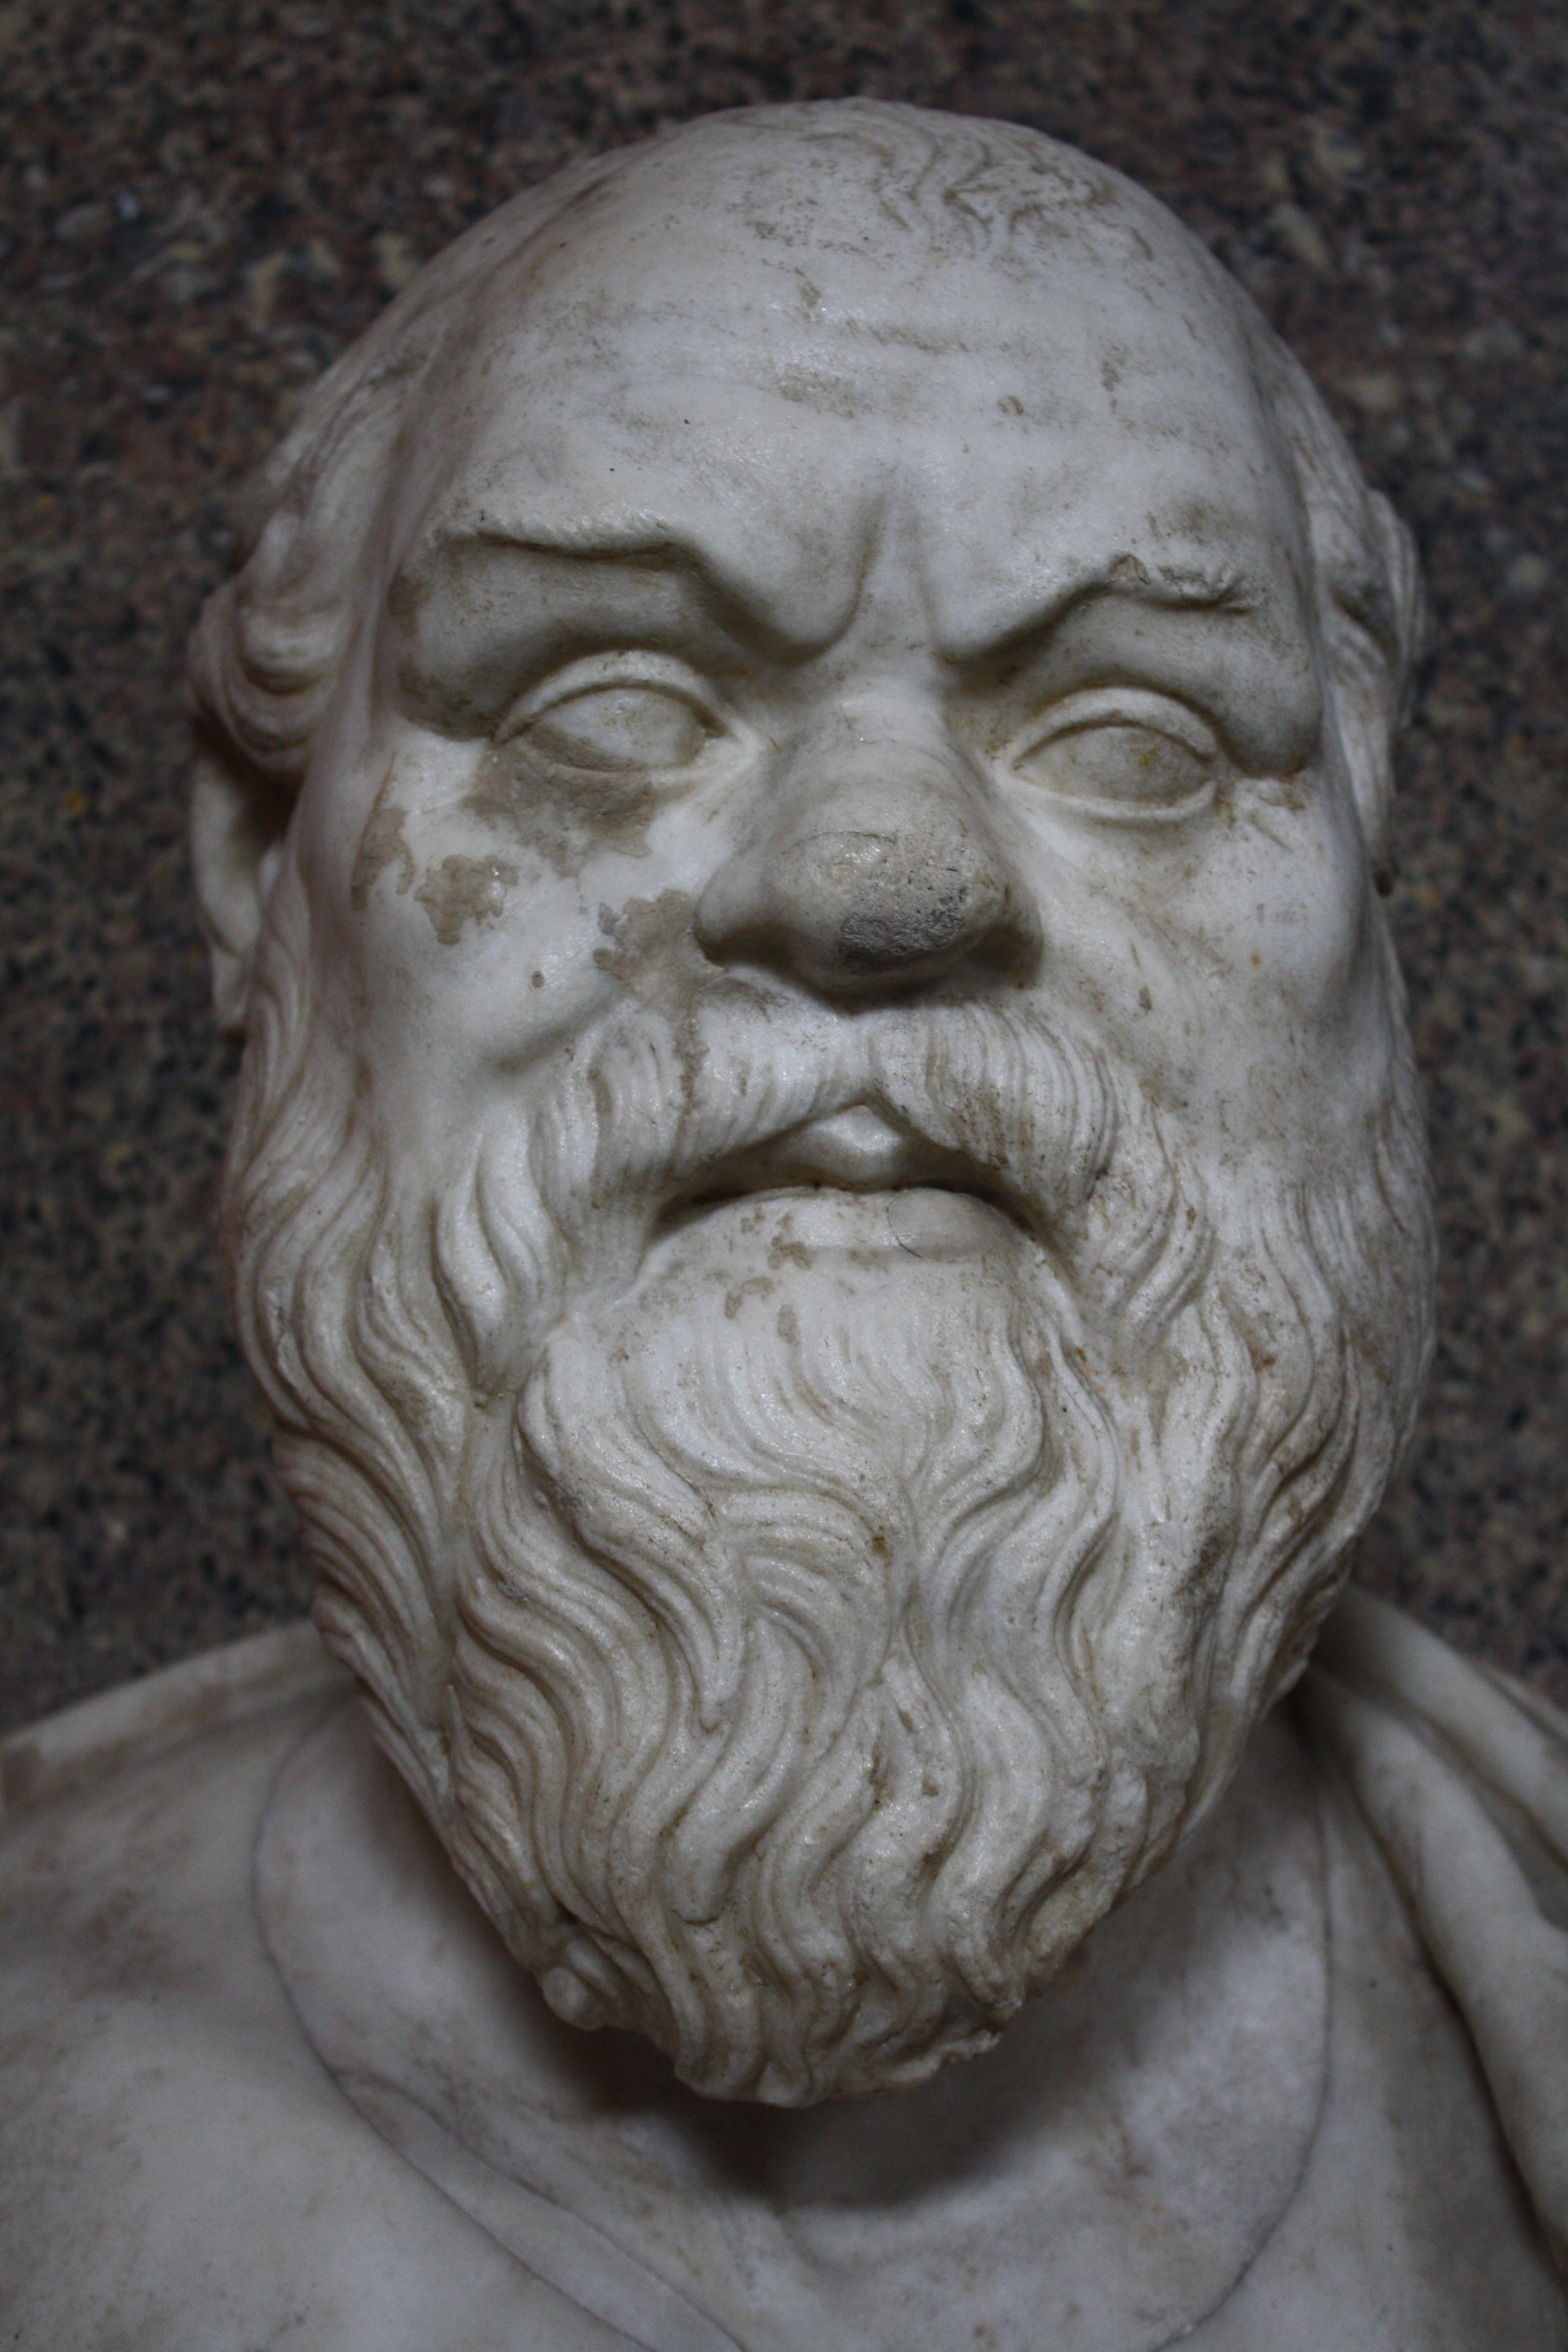 https://www.worldhistory.org/image/1258/socrates-bust-vatican-museums/download/